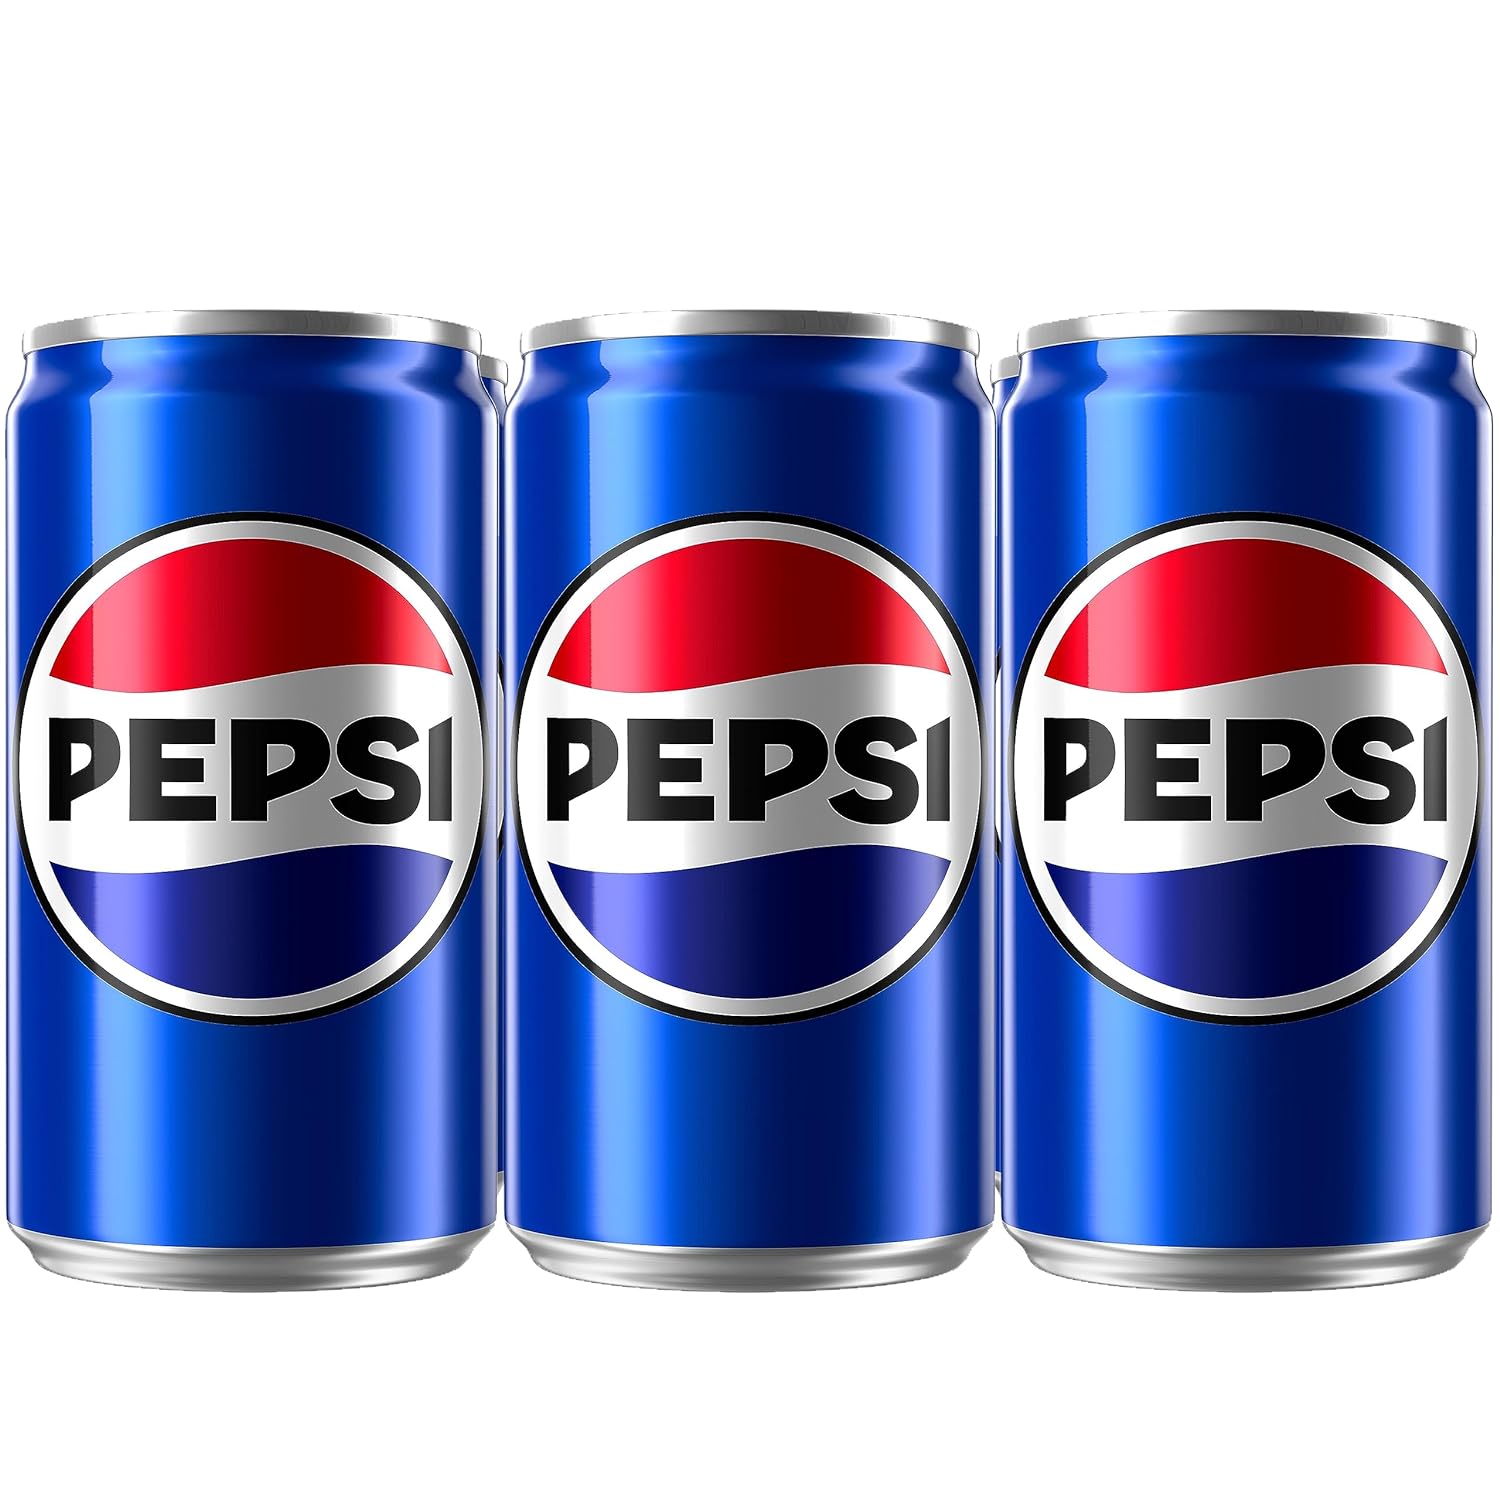 Pepsi Cola Soda Pop, 12 fl oz Cans, 18 Pack Cans - image 3 of 8